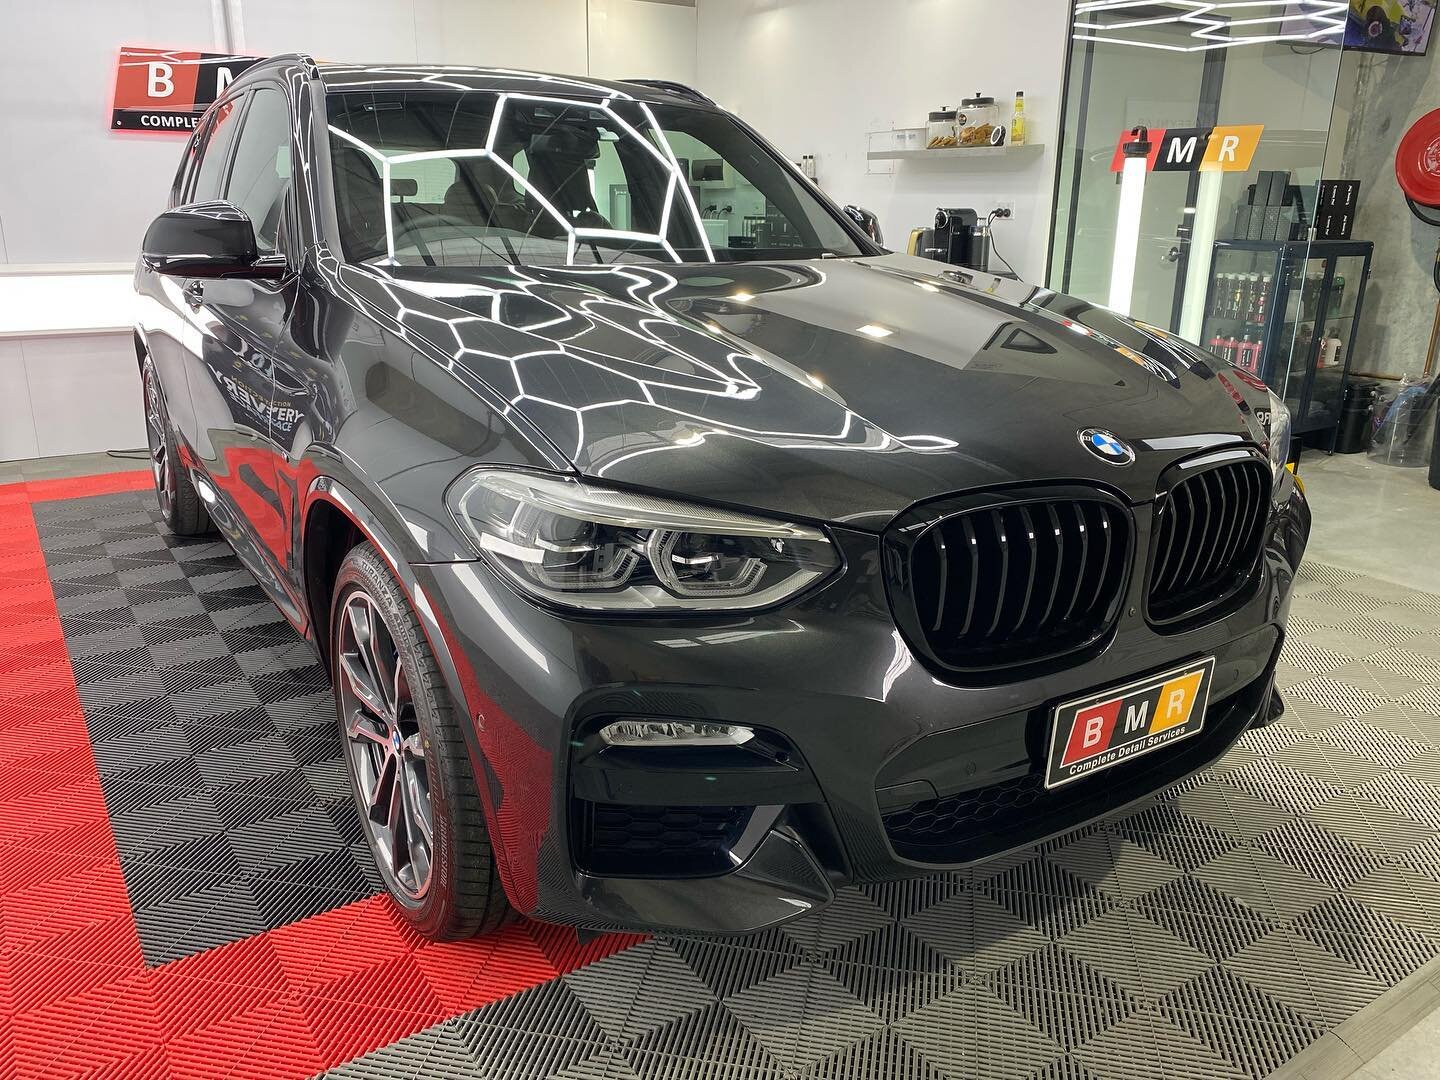 BMW X3 complete protection package. Light paint correction to remove minor swirling and bring out more gloss. Now wearing our BMR Graphene Coating protected for the next 5 years including wheels, glass &amp; leather
&bull;
&bull;

#bmrdetailing #sydn